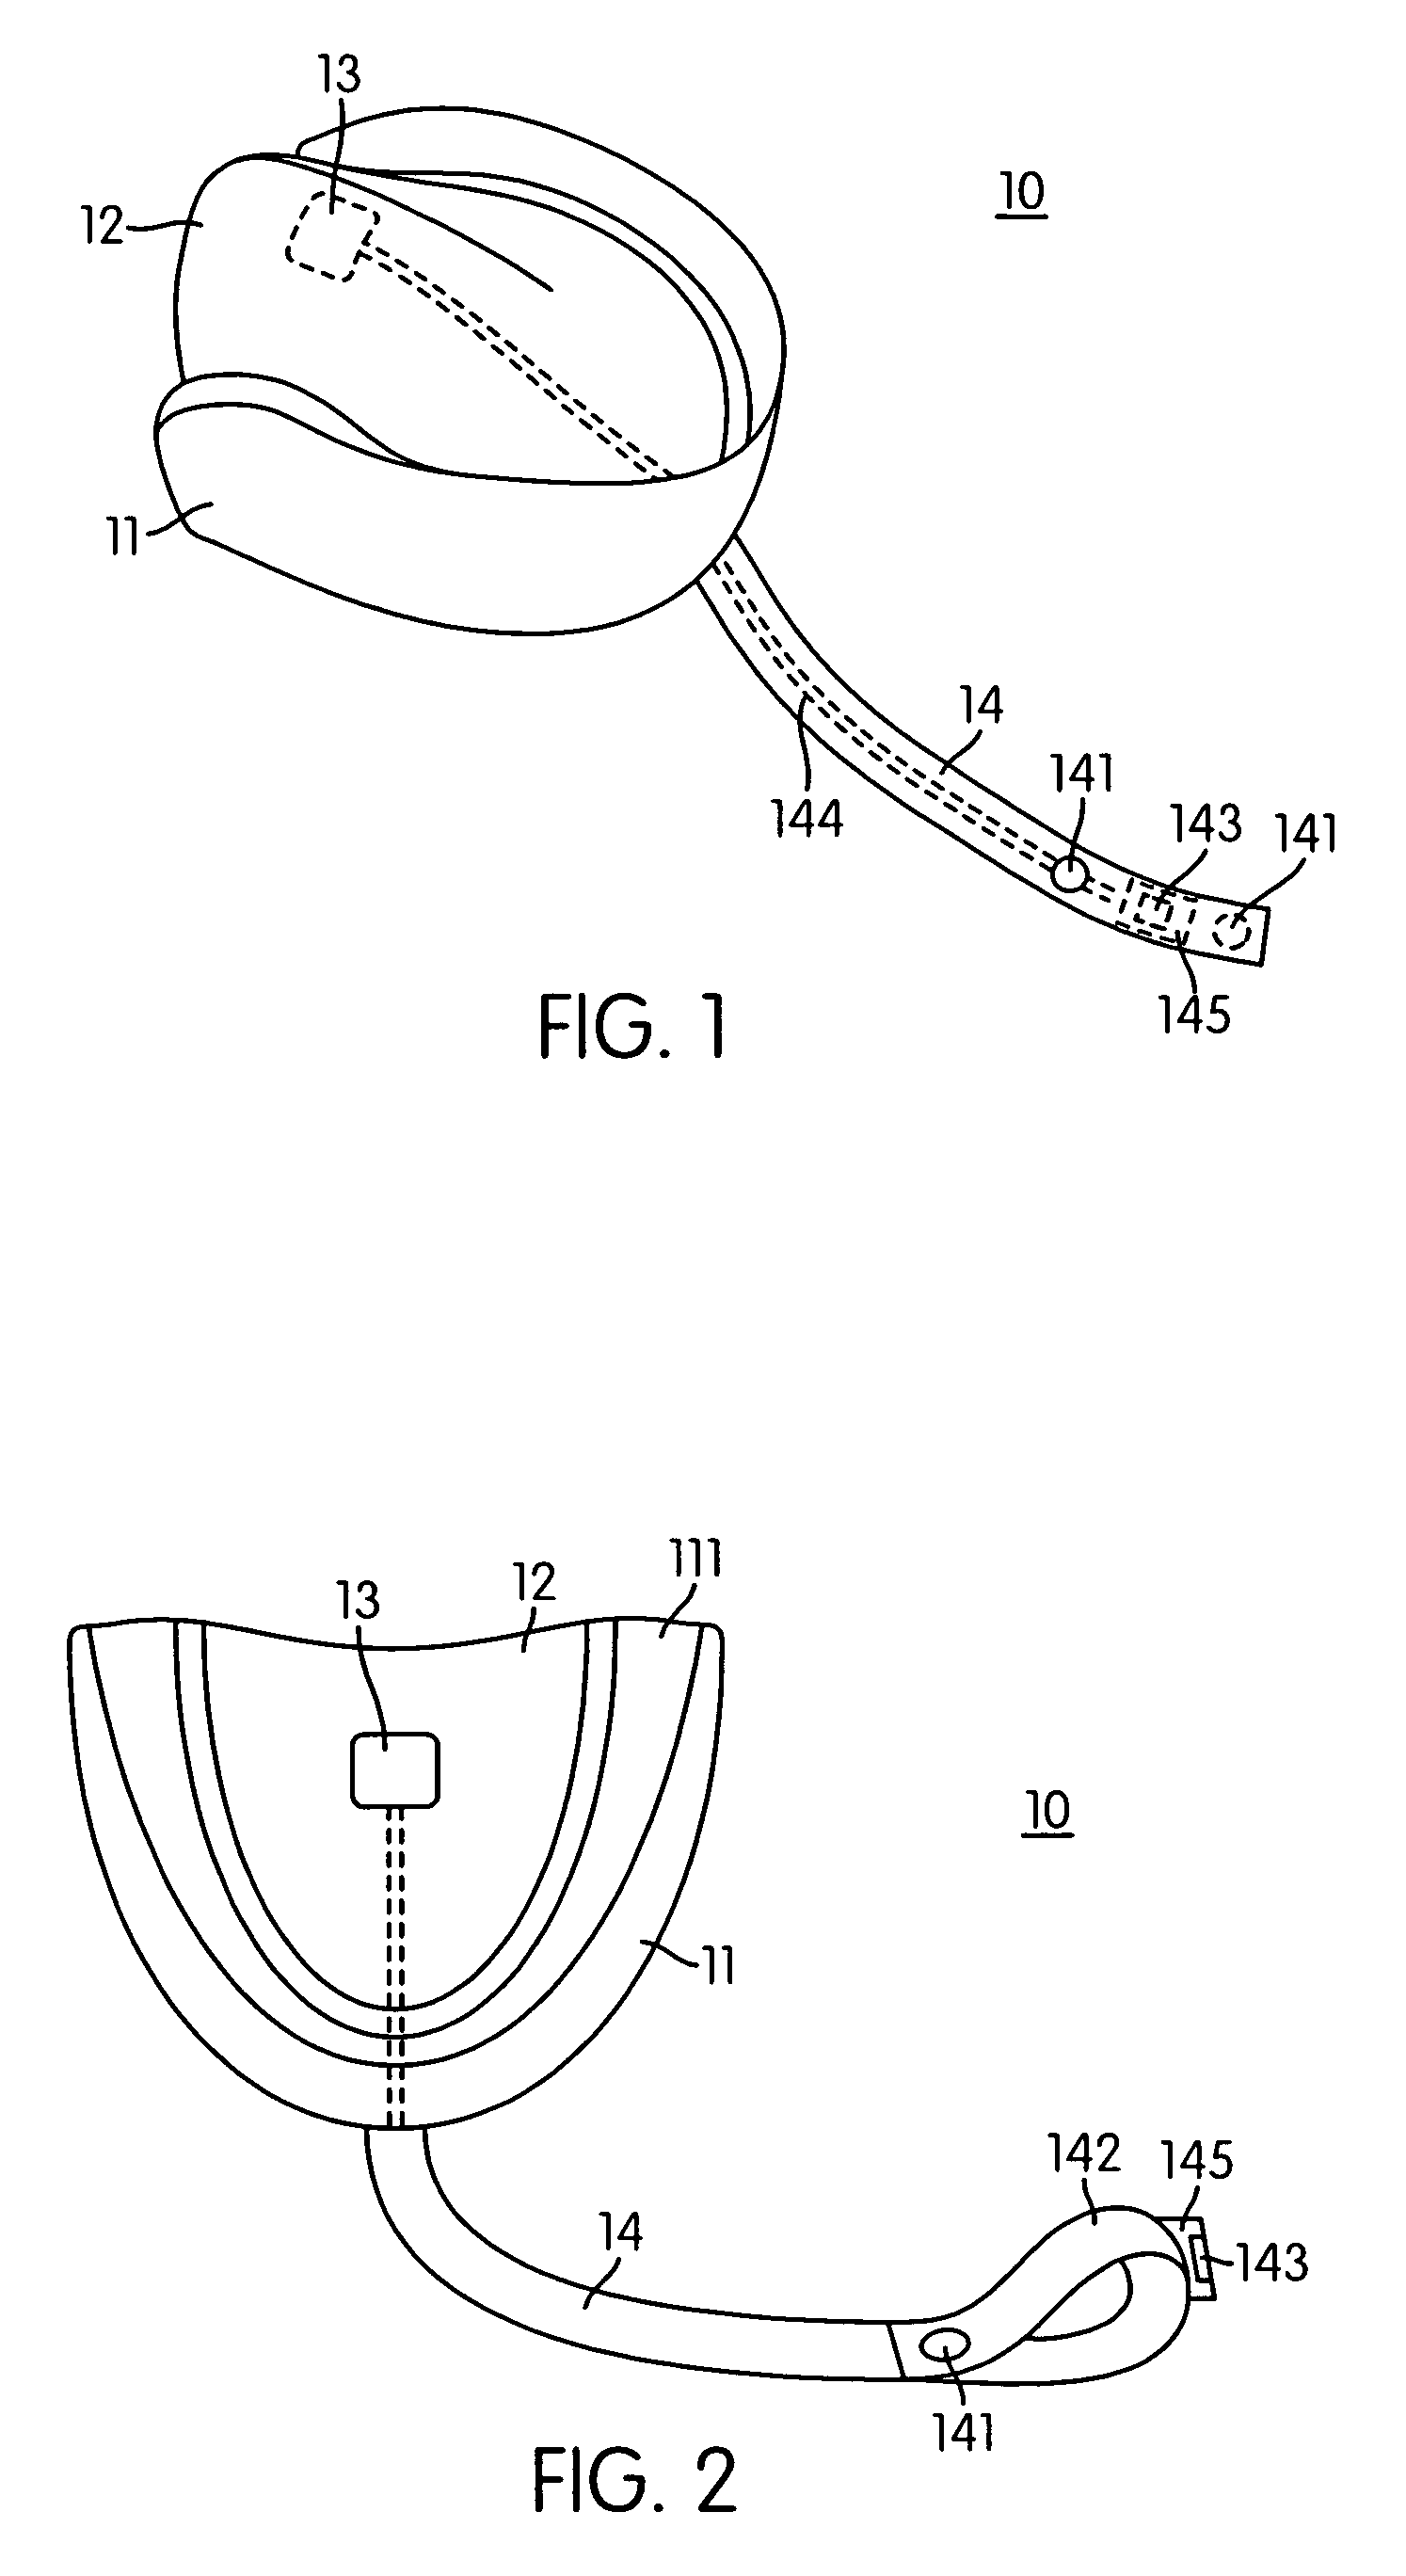 Athletic mouthpiece capable of sensing linear and rotational forces and protective headgear for use with the same